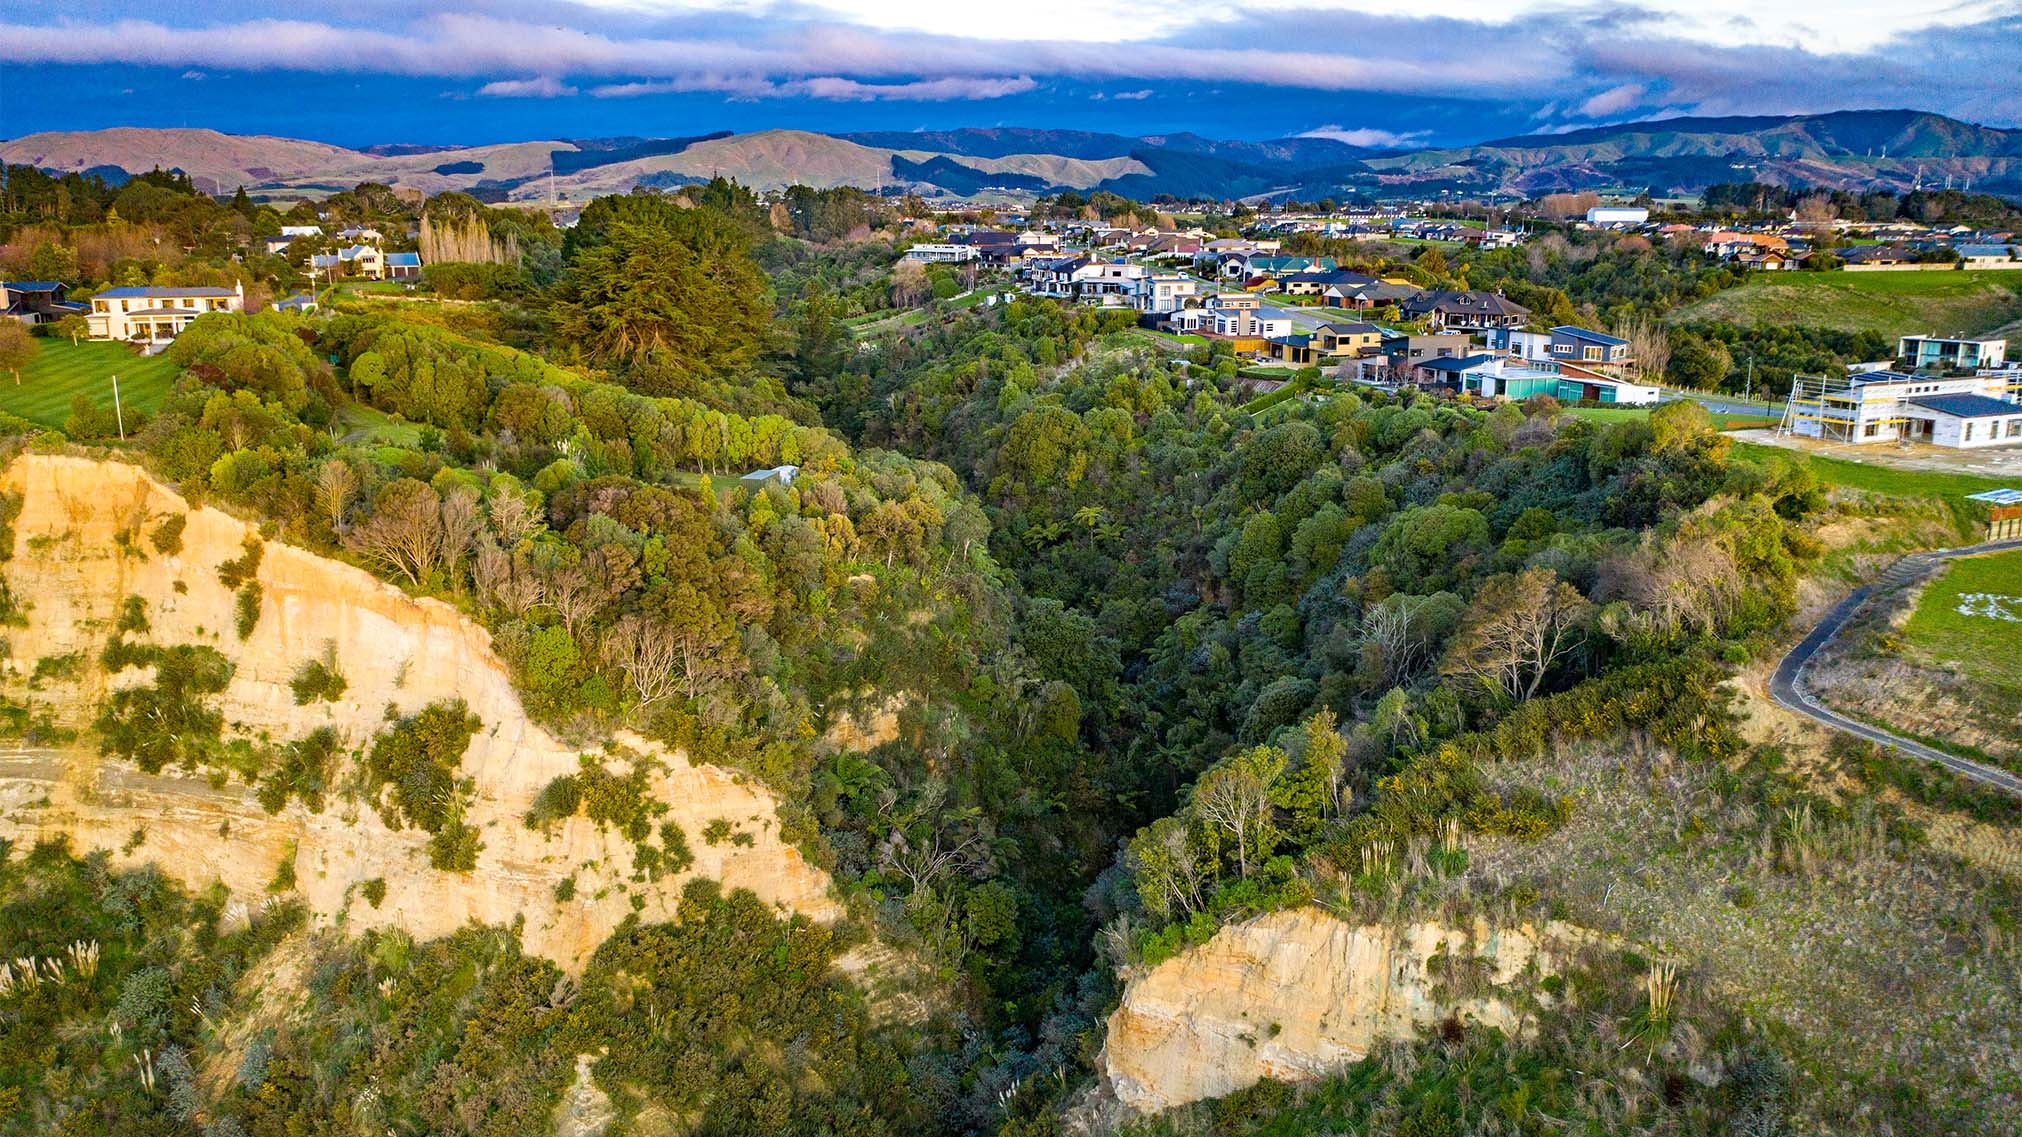 Aerial view of gully heavily planted with natives, with sprawling homes and the ranges visible in the background.